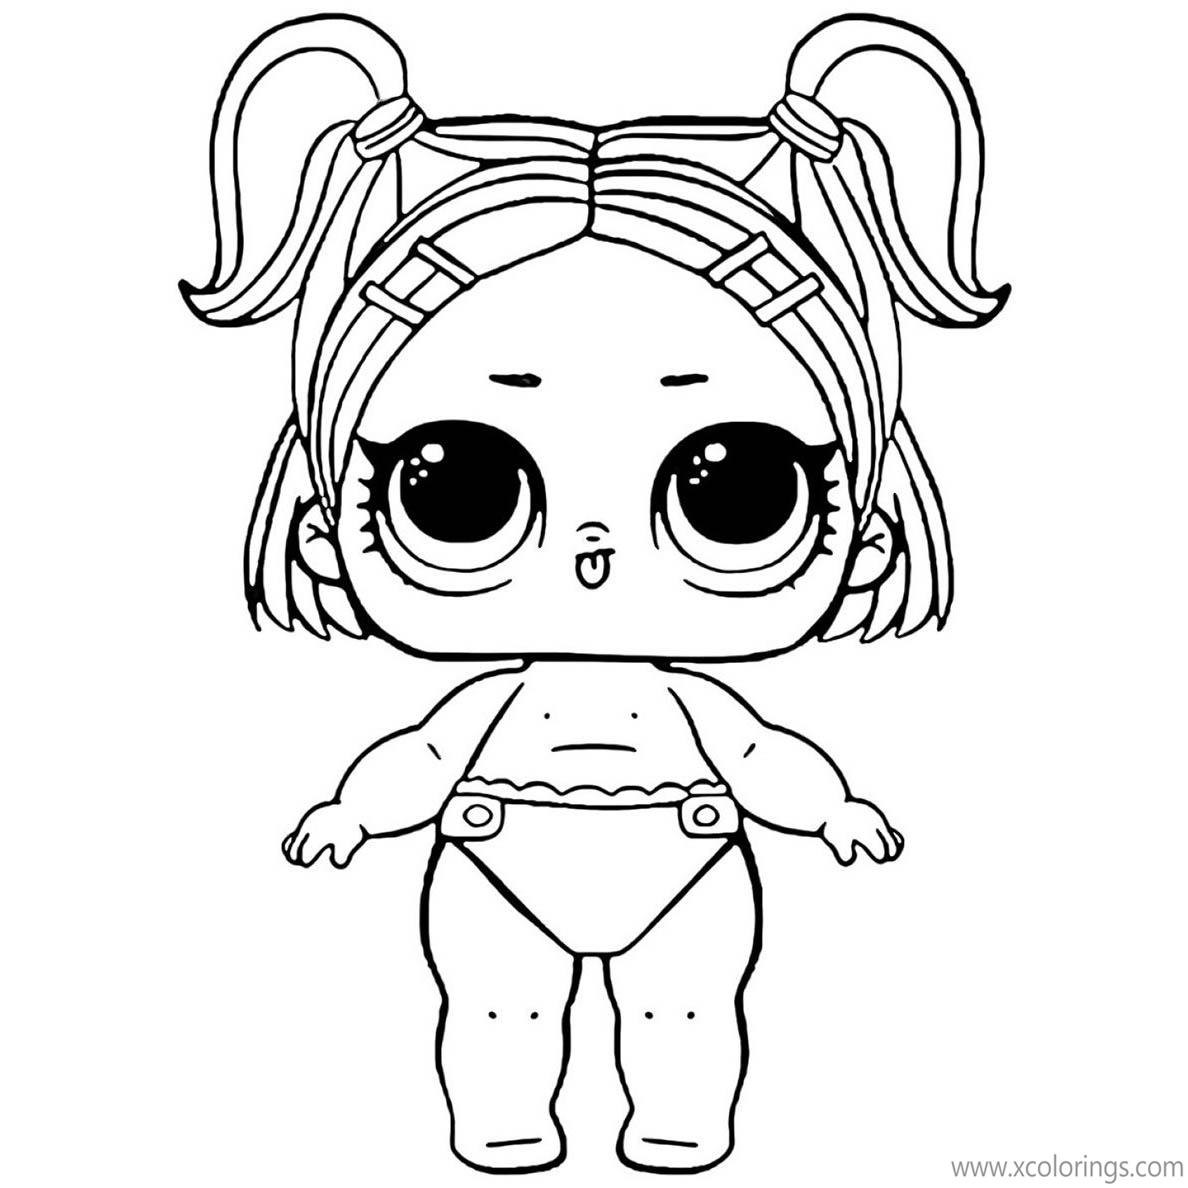 LOL Baby Coloring Pages LIL Sprints - XColorings.com